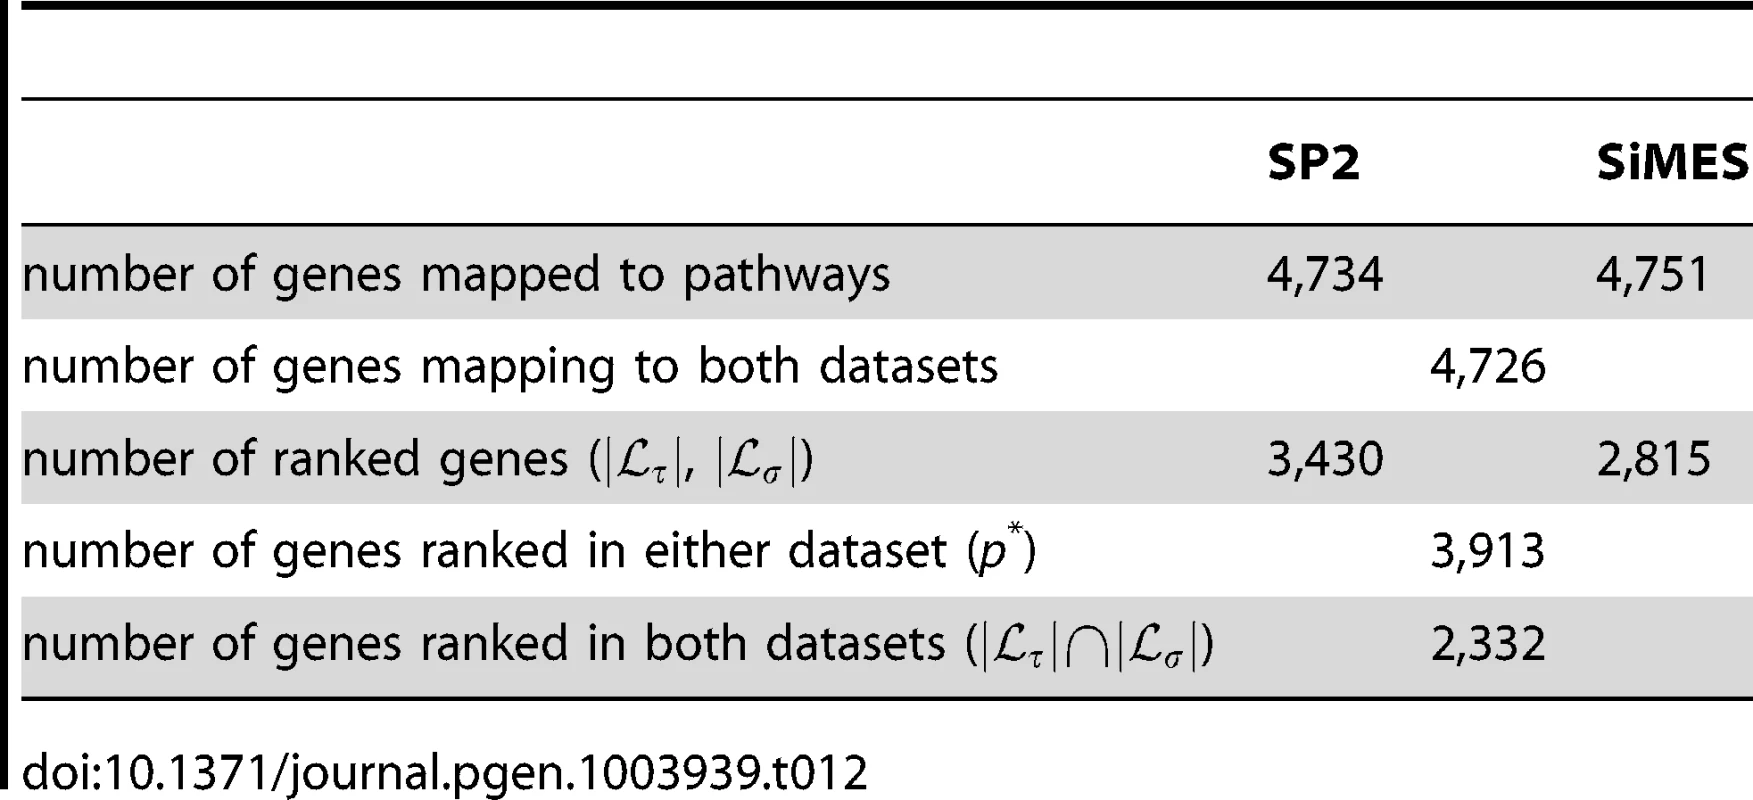 Summary of genes analysed and ranked in SP2 and SiMES datasets.